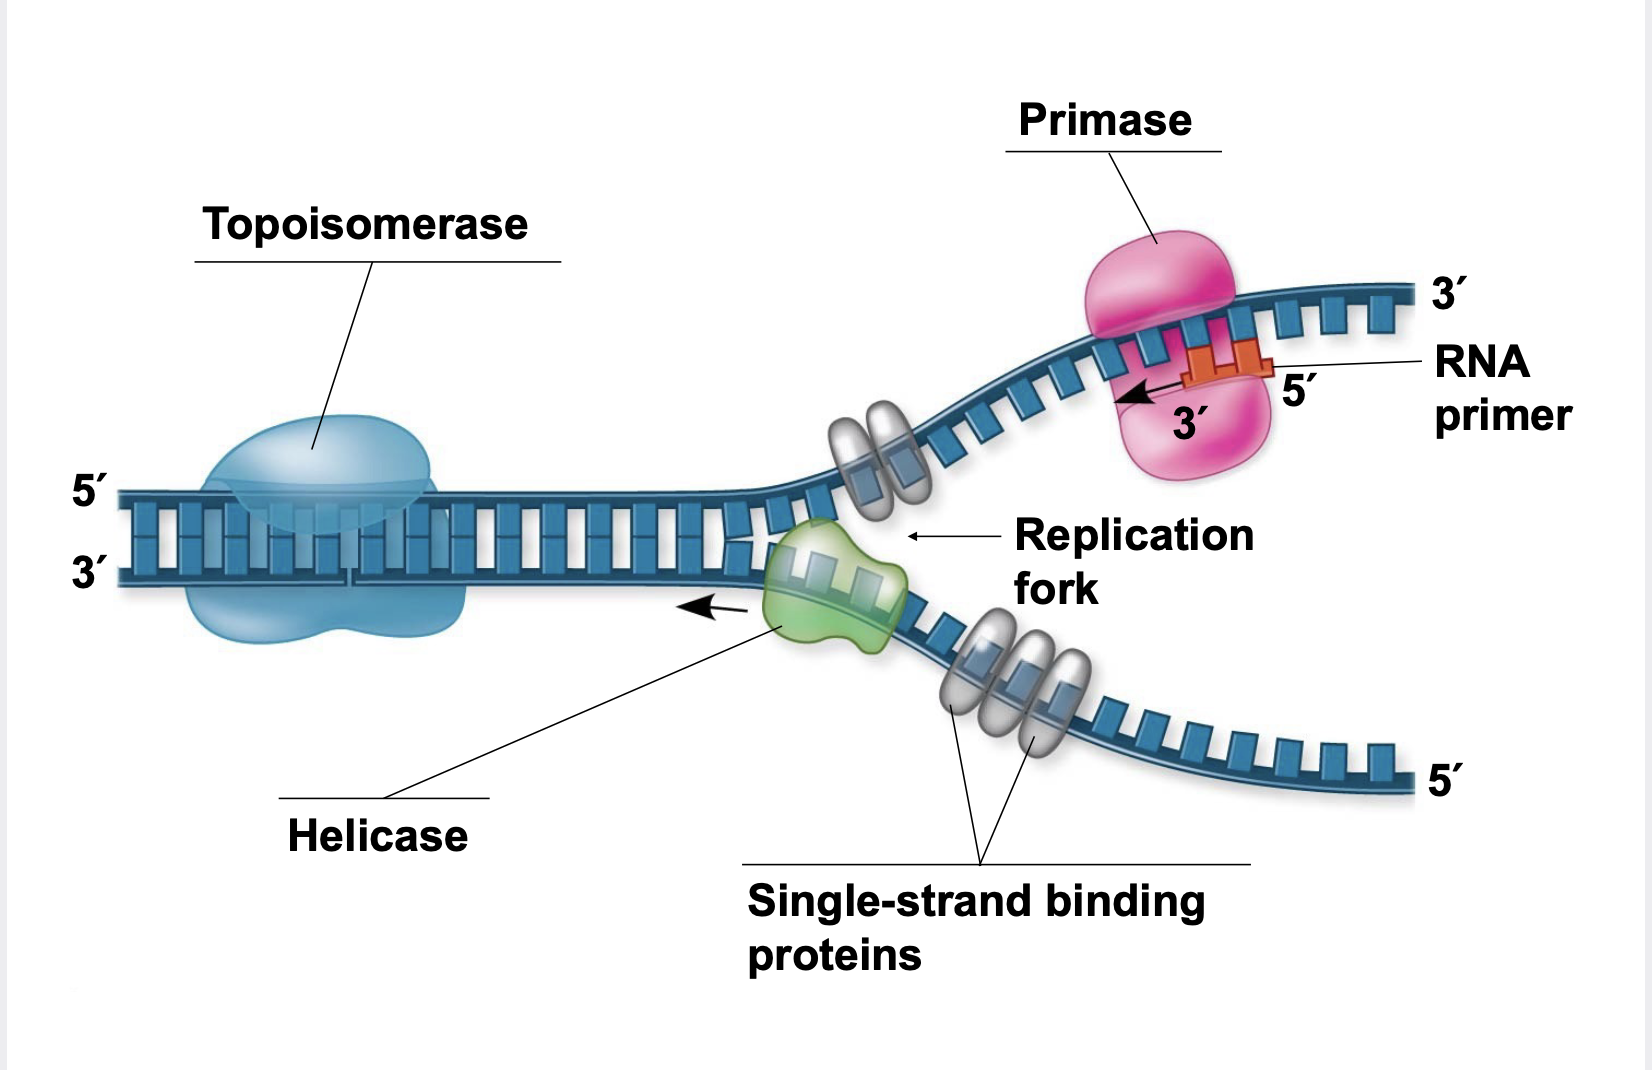 <p>At the end of each replication bubble is a replication fork, a Y-shaped region where new DNA strands are elongating.</p><p>.Helicases are enzymes that untwist the double helix at the replication forks</p><p>.Single-strand binding proteins bind to and stabilize single-stranded DNA</p><p>.Topoisomerase corrects “overwinding” ahead of replication forks by breaking, swiveling, and rejoining DNA strands</p><p>.DNA polymerases cannot initiate synthesis of a polynucleotide; they can only add nucleotides to an existing 3′ end \n .The initial nucleotide strand is a short RNA primer \n .An enzyme called primase can start an RNA chain from scratch and adds RNA nucleotides one at a time using the parental DNA as a template \n .The primer is short (5–10 nucleotides long), and the 3′ end serves as the starting point for the new DNA strand</p>